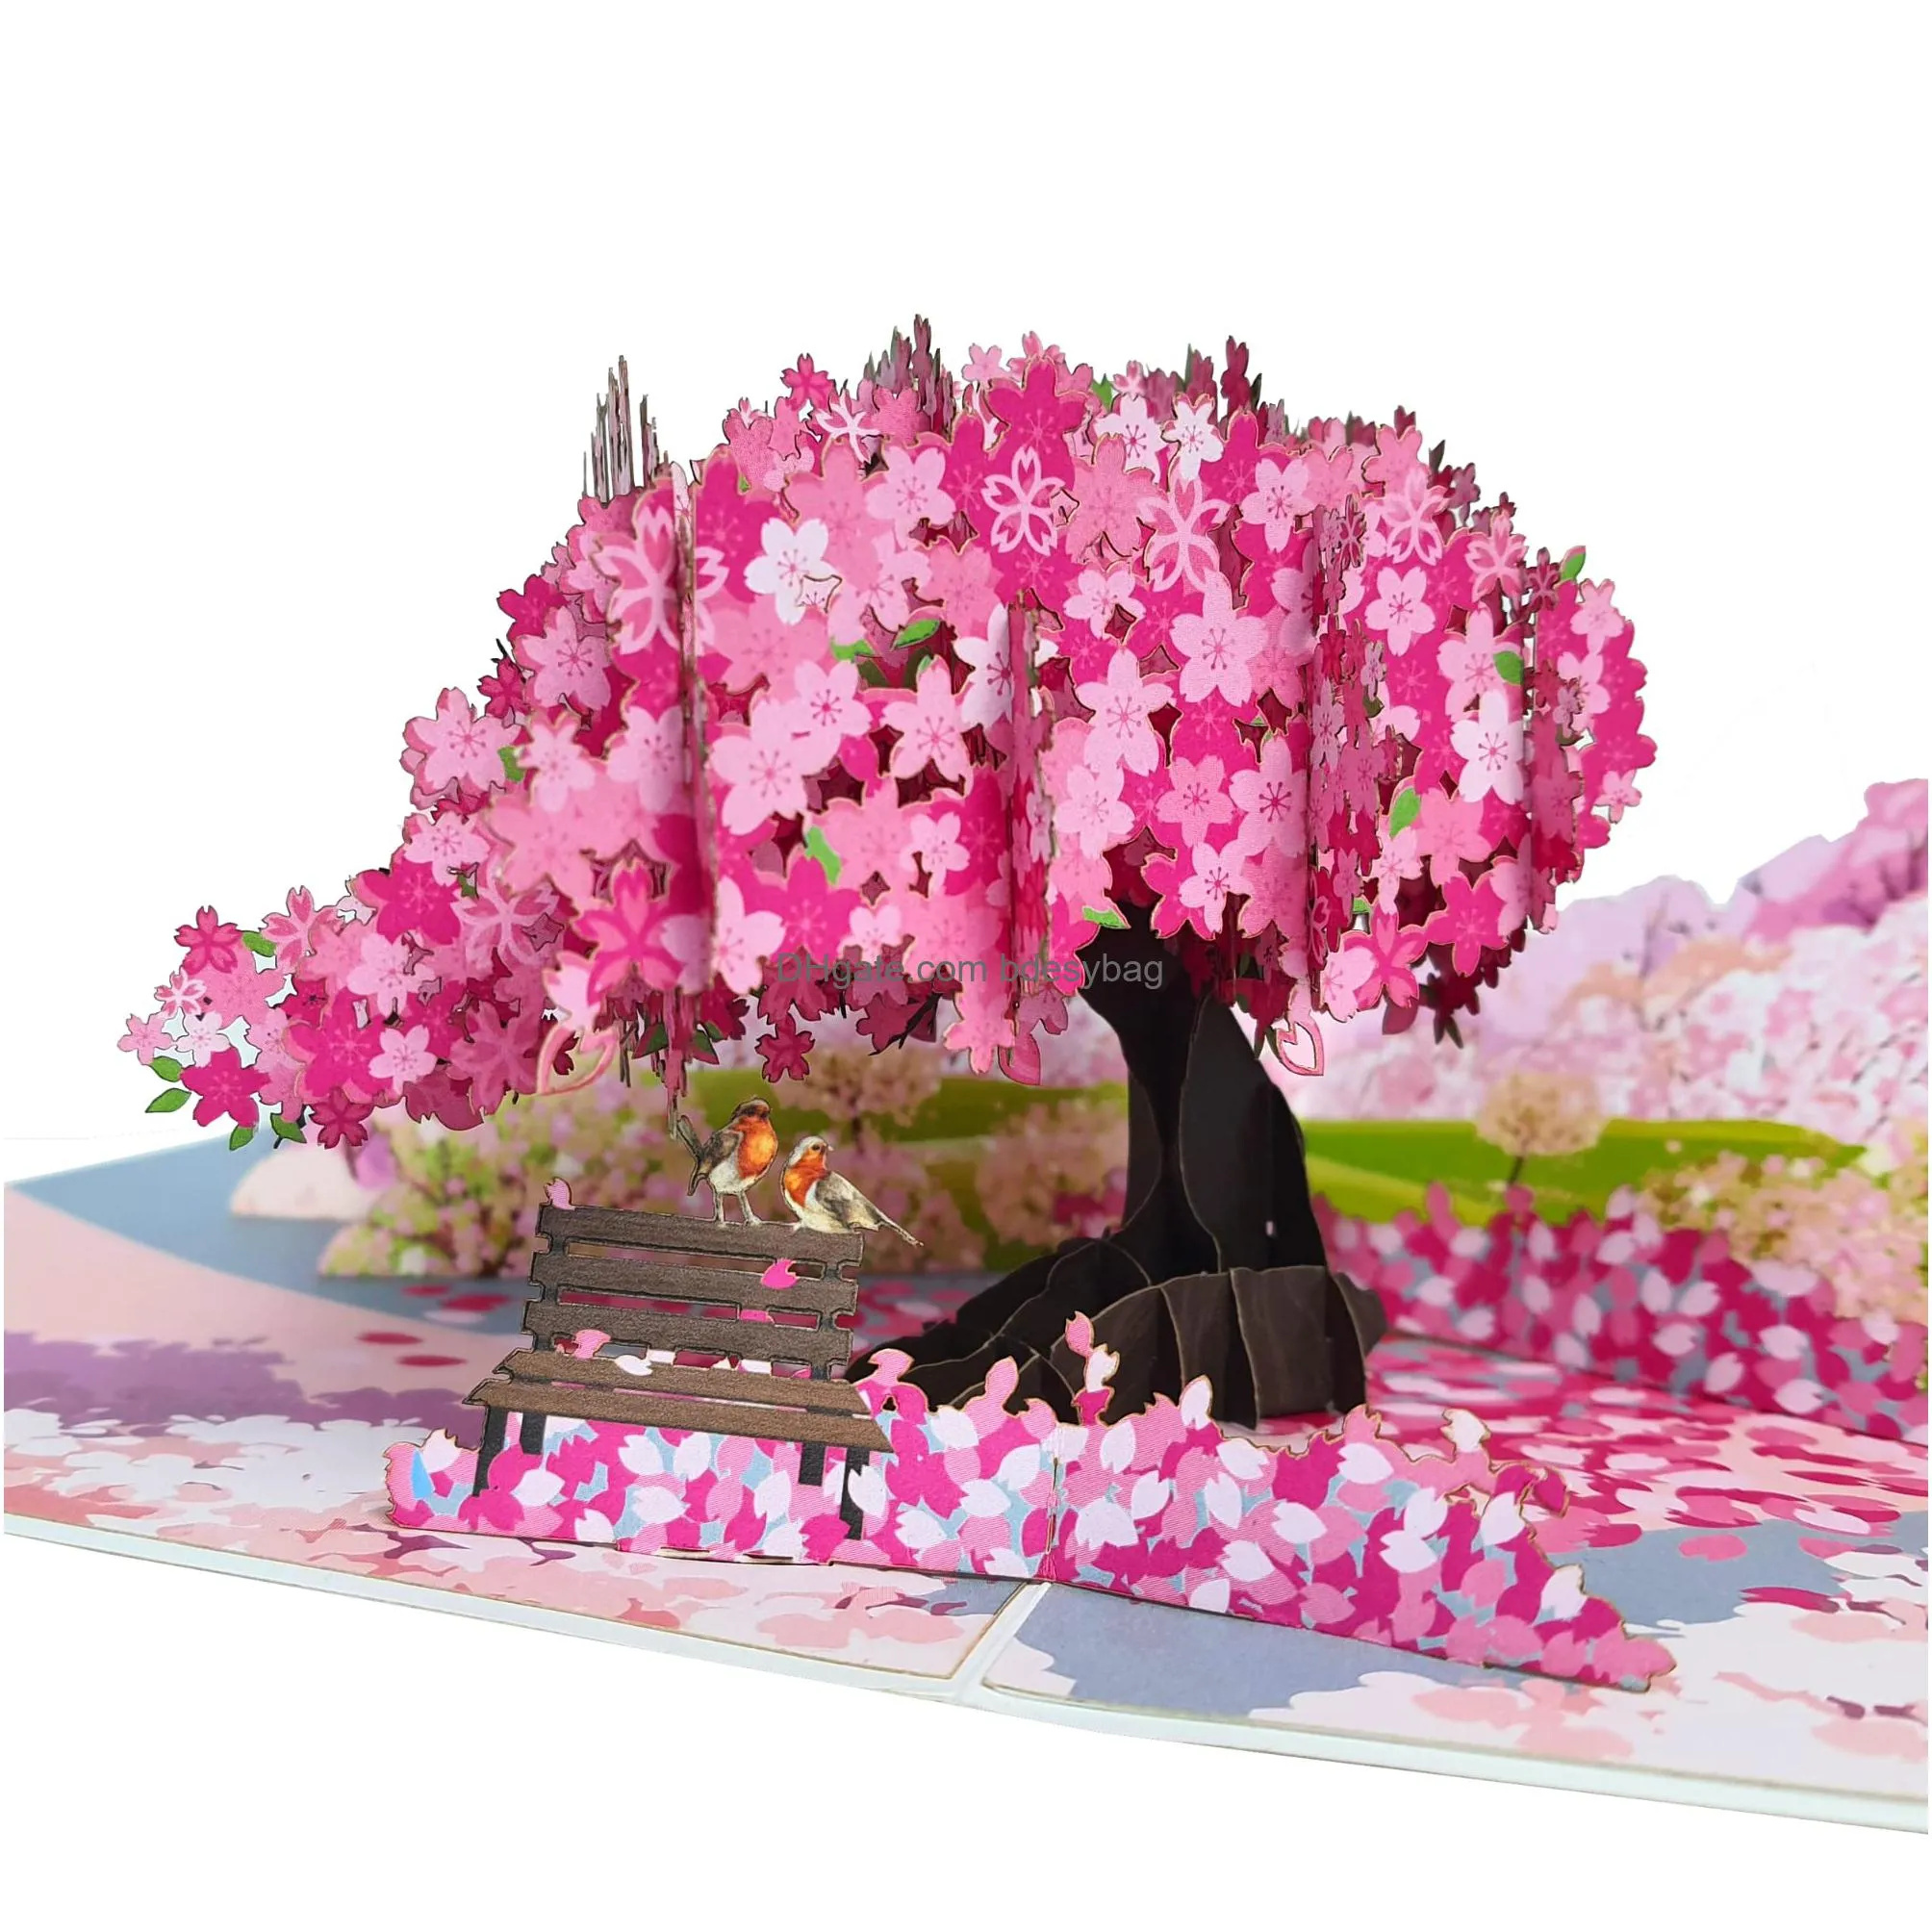 orchid 3d  up card for valentines mothers day all occasions 5 x 7 cover includes envelope and note tag